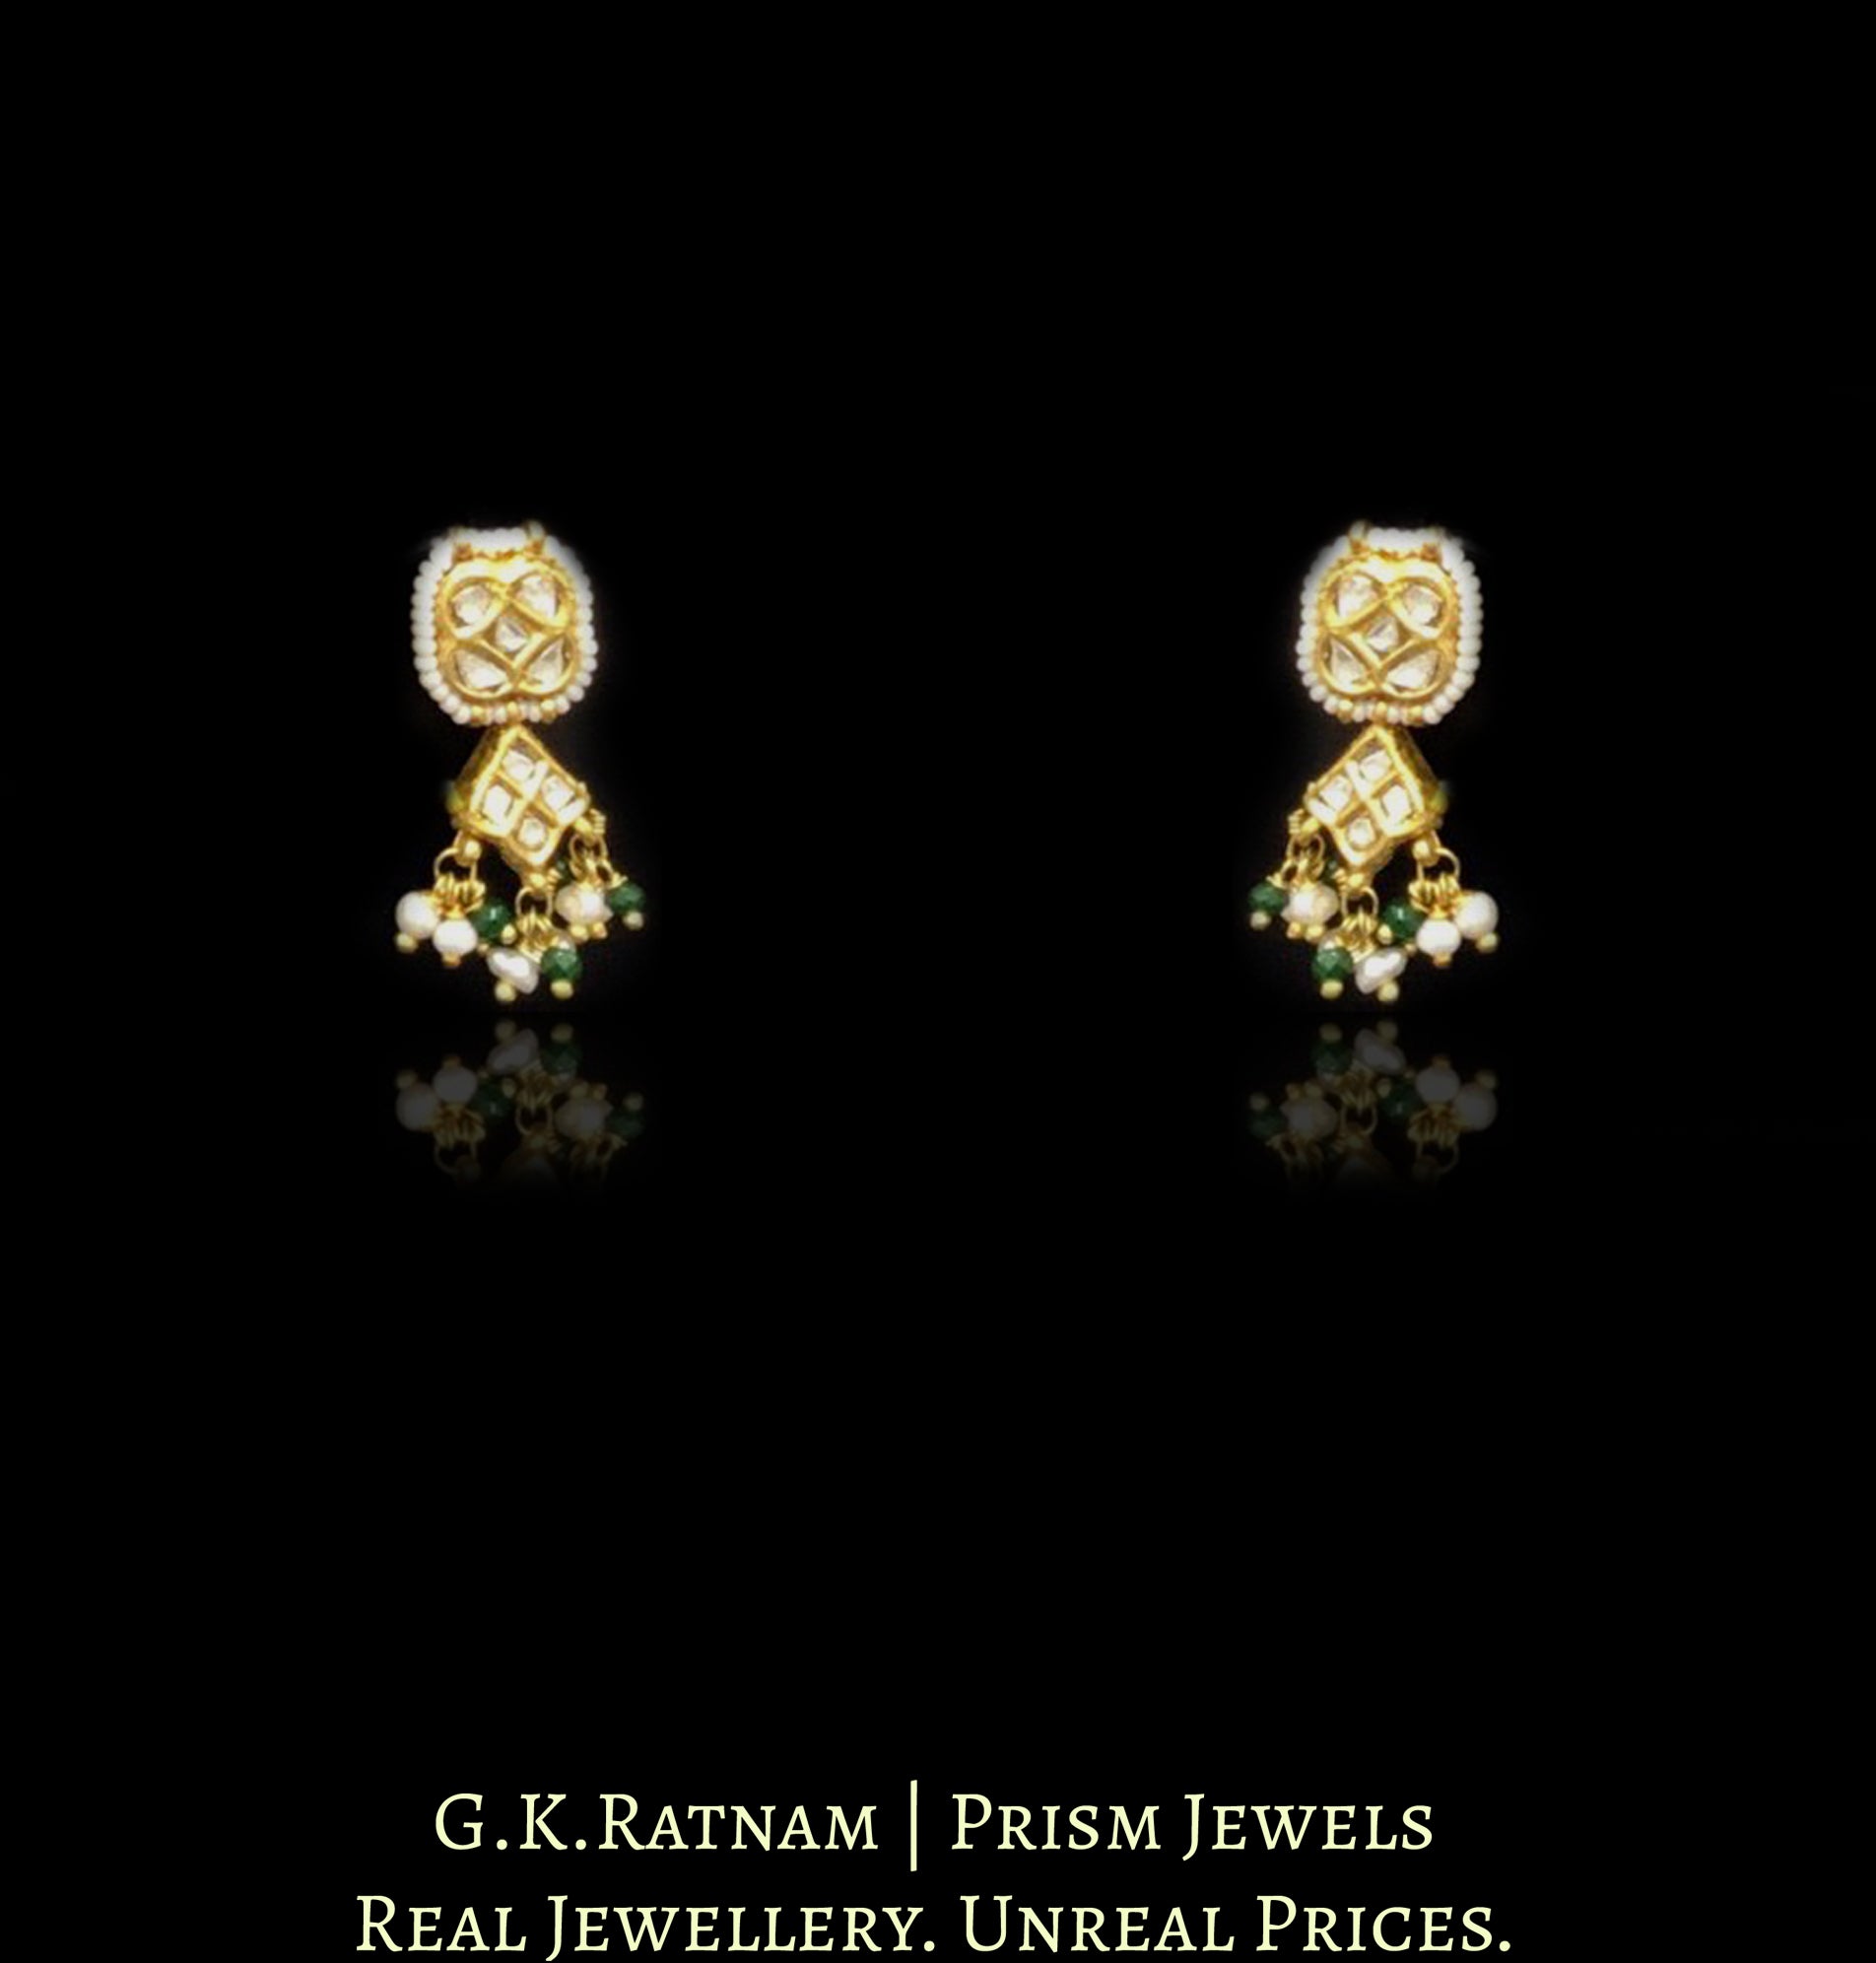 23k Gold and Diamond Polki Half Necklace Set with Natural Hyderabadi Pearls and a hint of Green - G. K. Ratnam